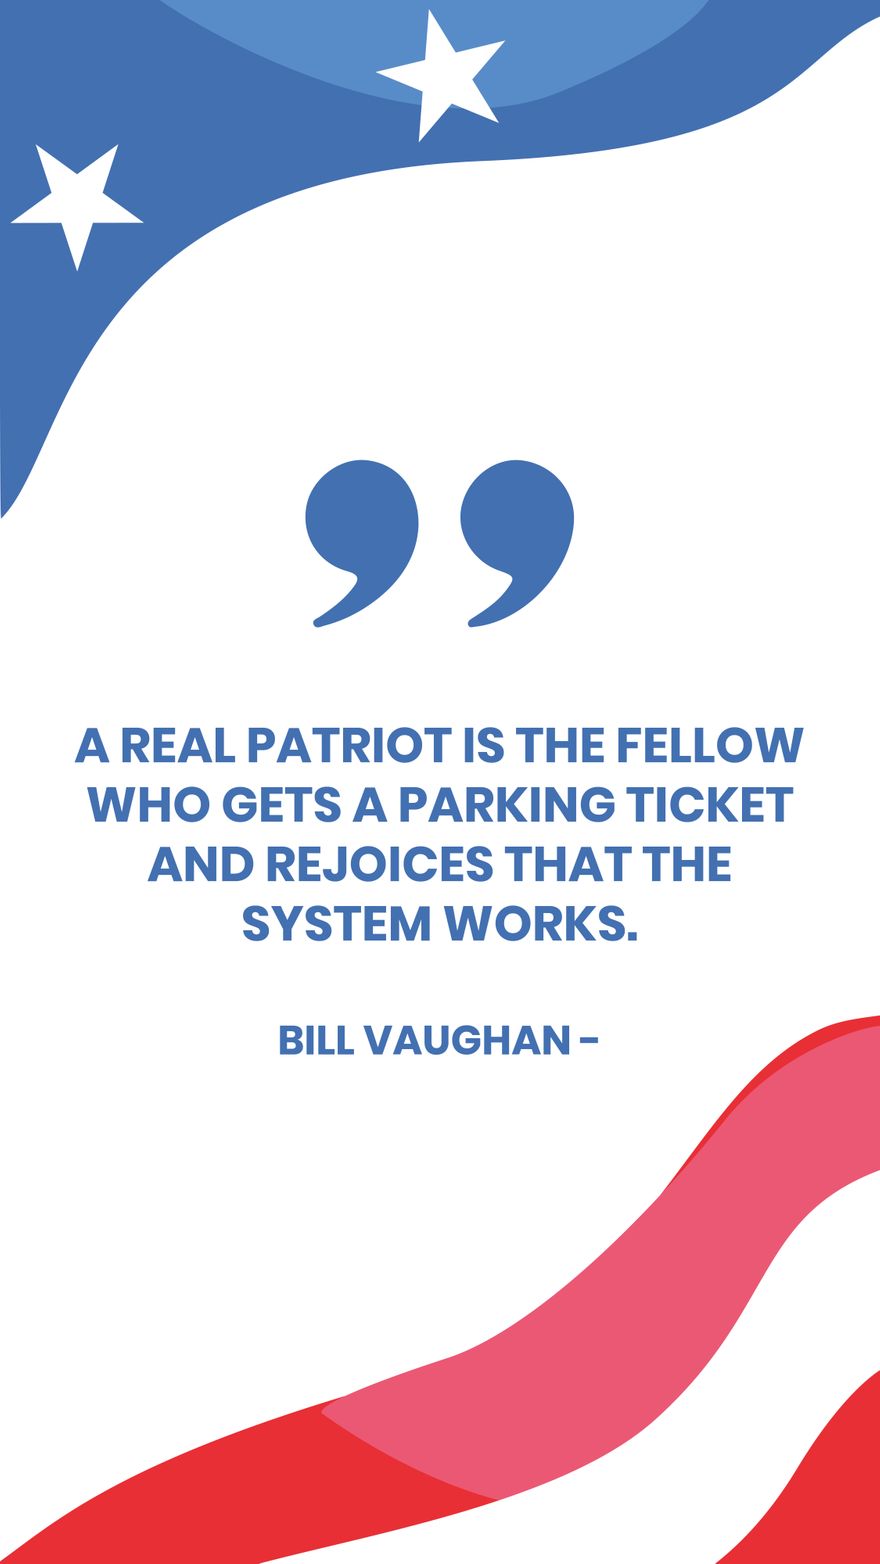 Bill Vaughan - A real patriot is the fellow who gets a parking ticket and rejoices that the system works. in JPG